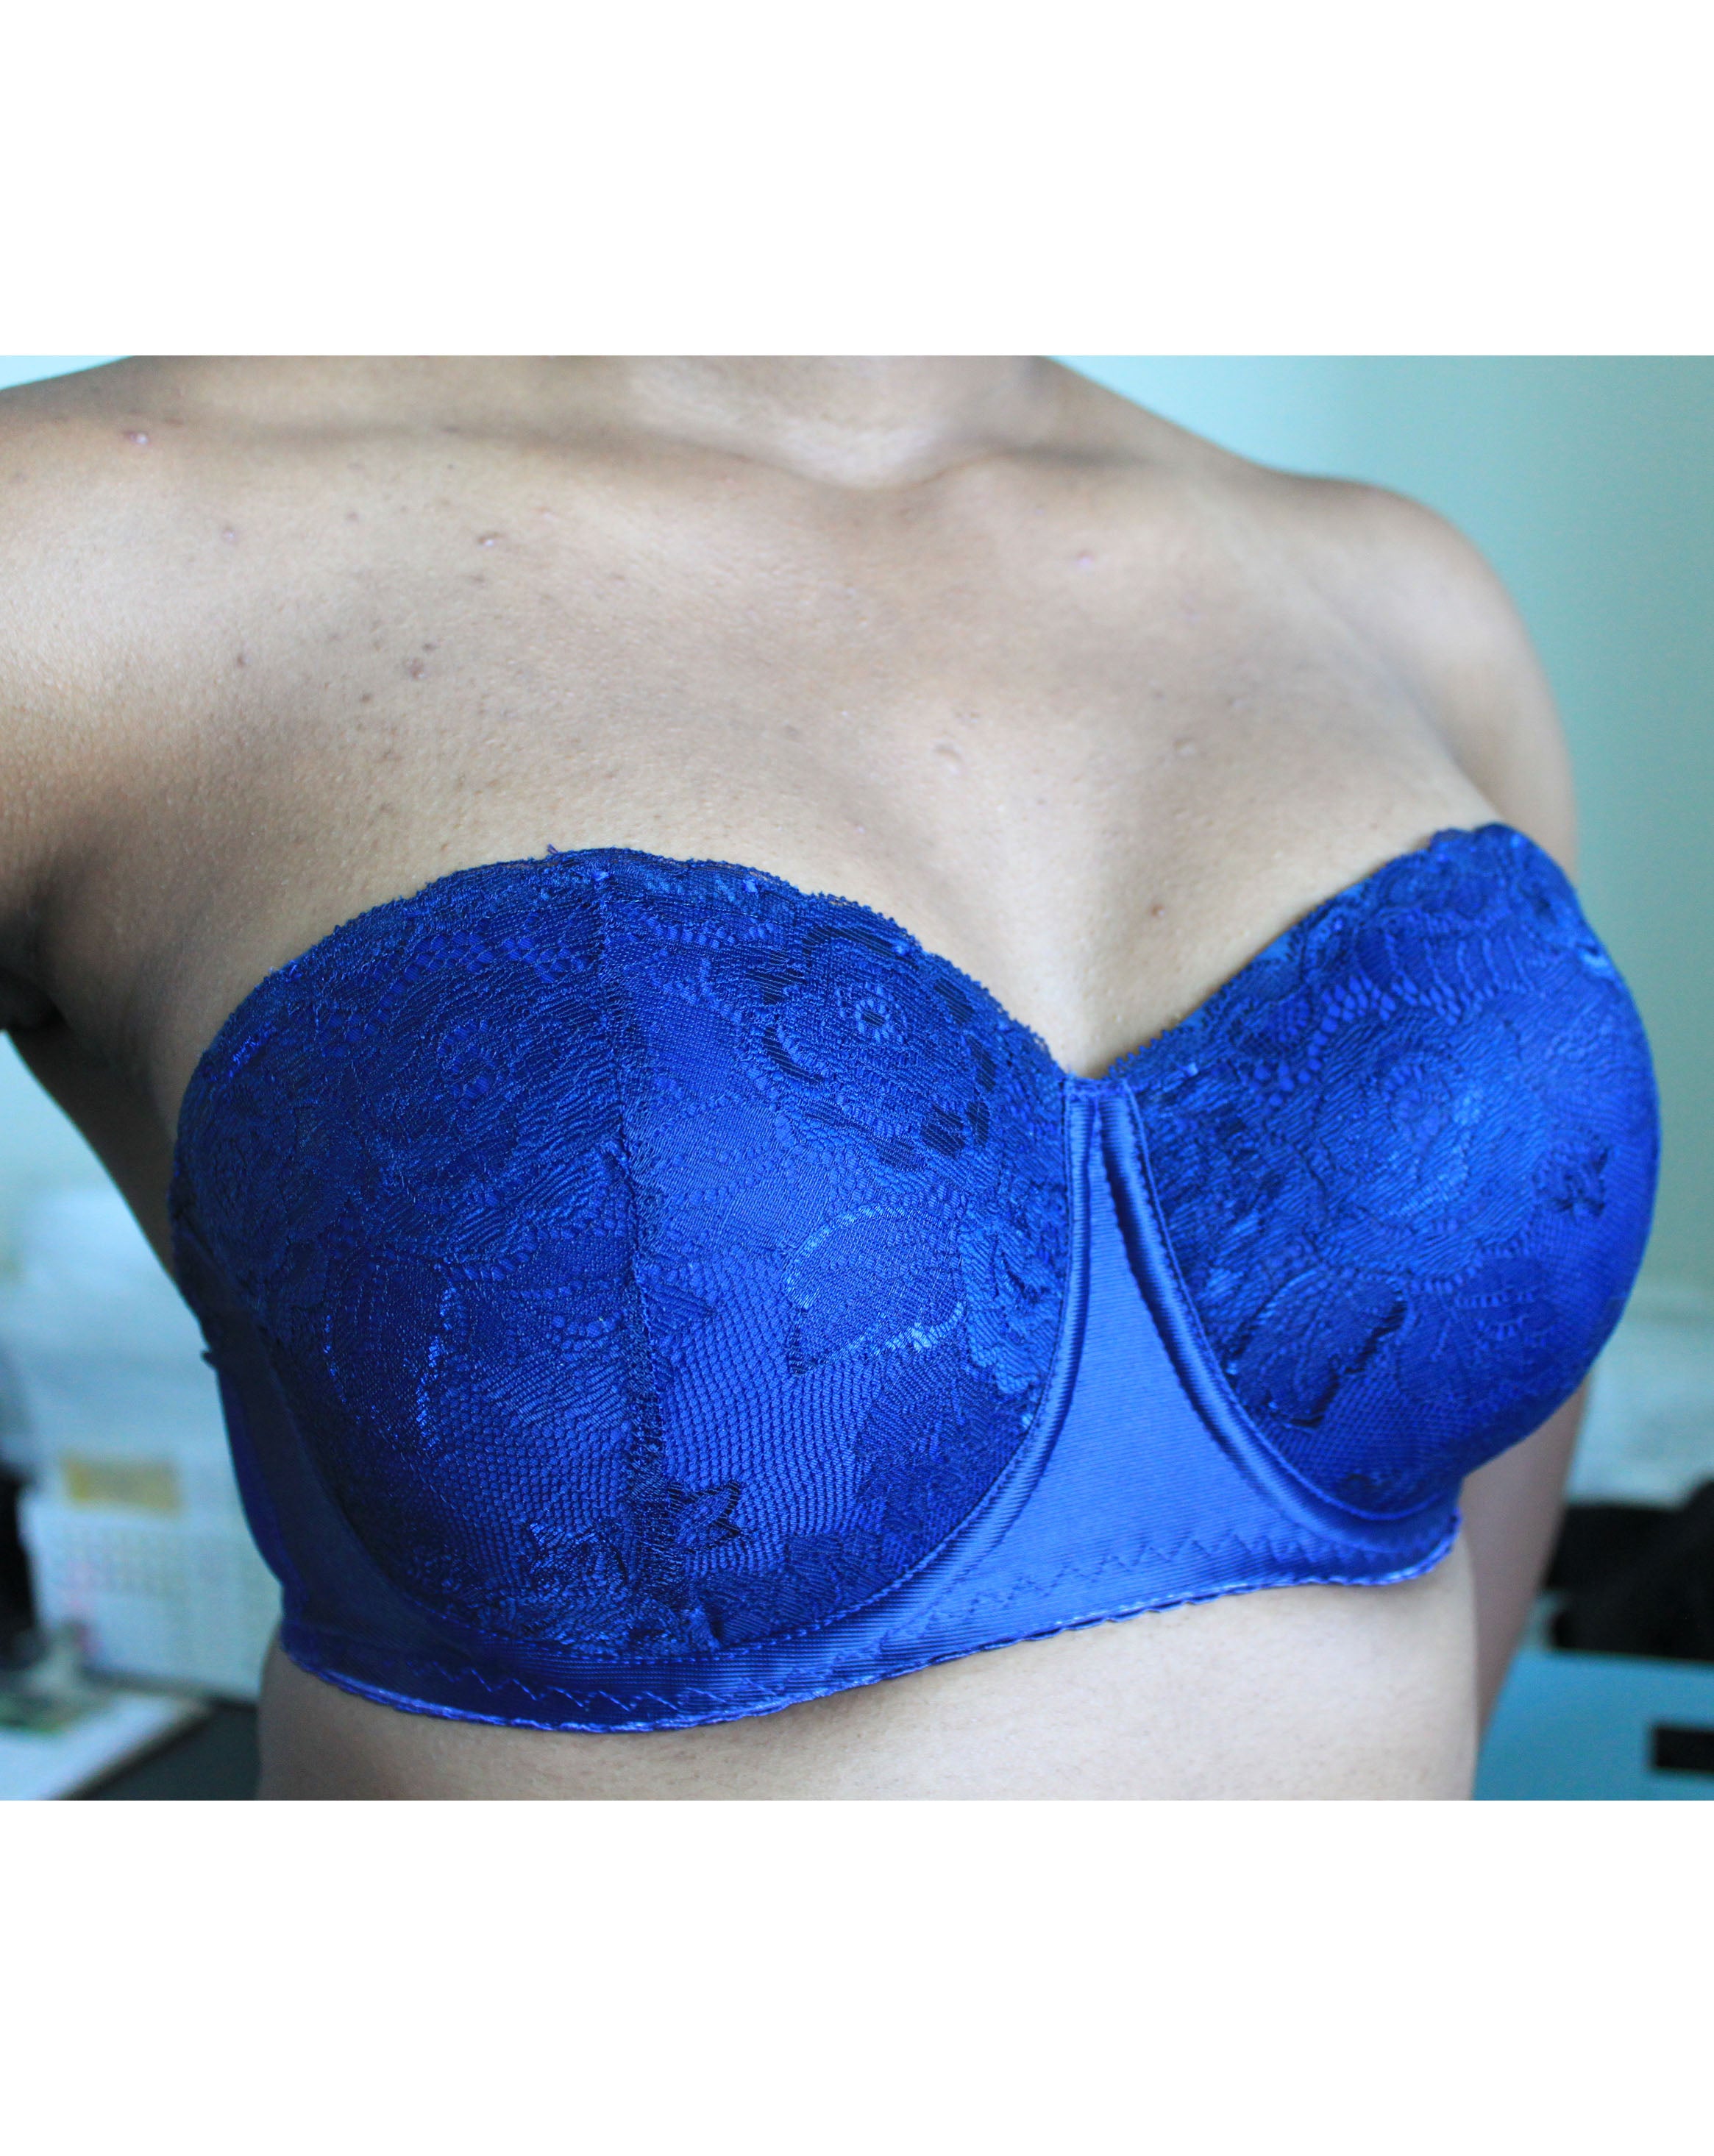 Rubies Bras client and model wearing our strapless specialty bra.